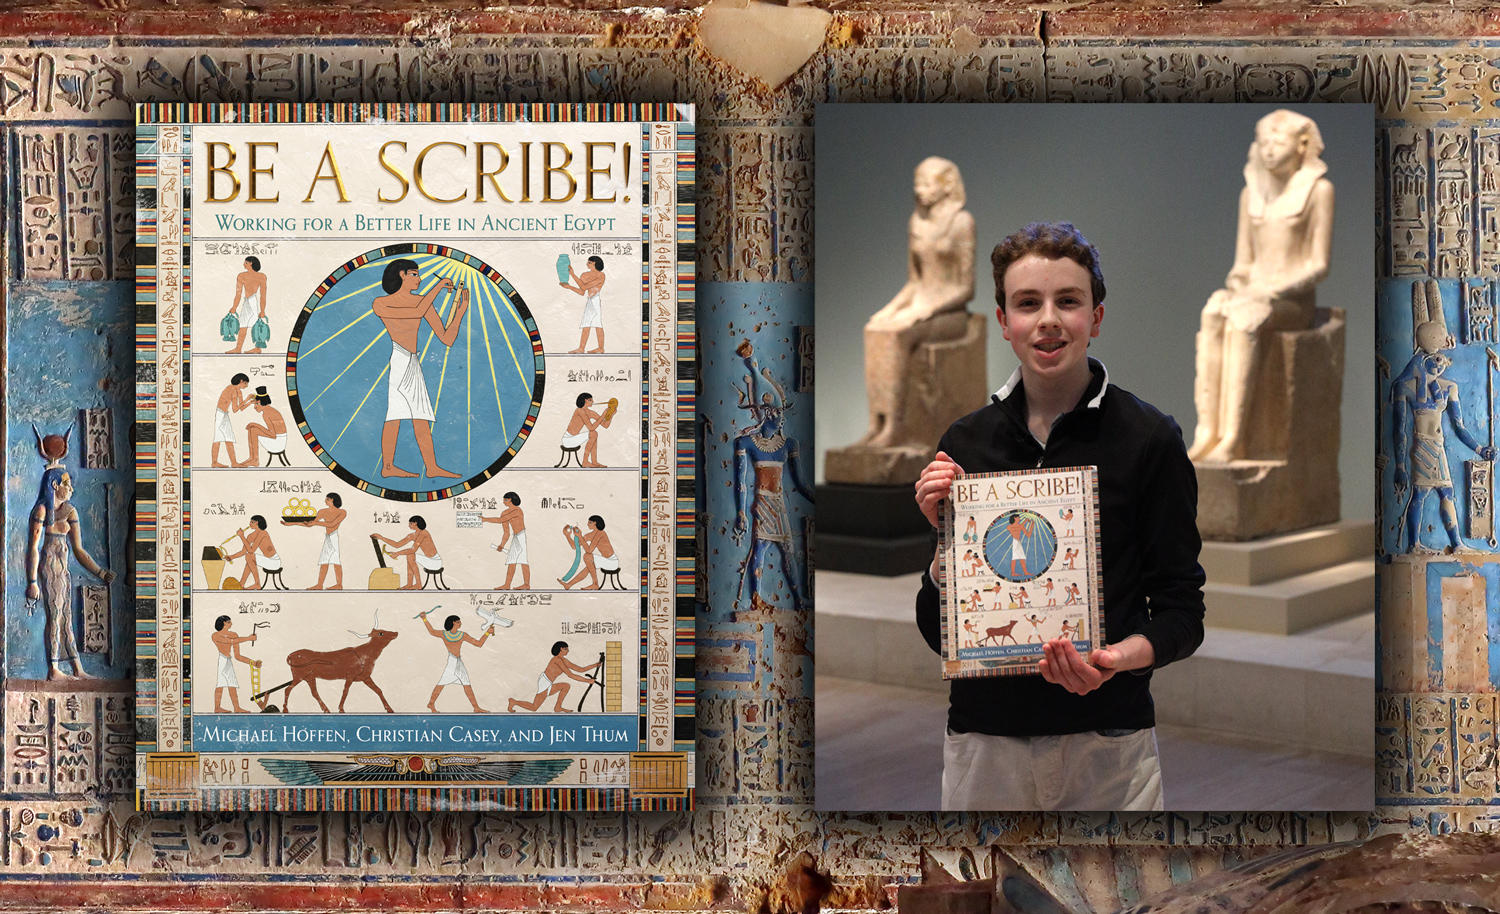 Side by side, the Be a Scribe book cover and Michael Hoffen posing with the book in front of objects from ancient Egypt.